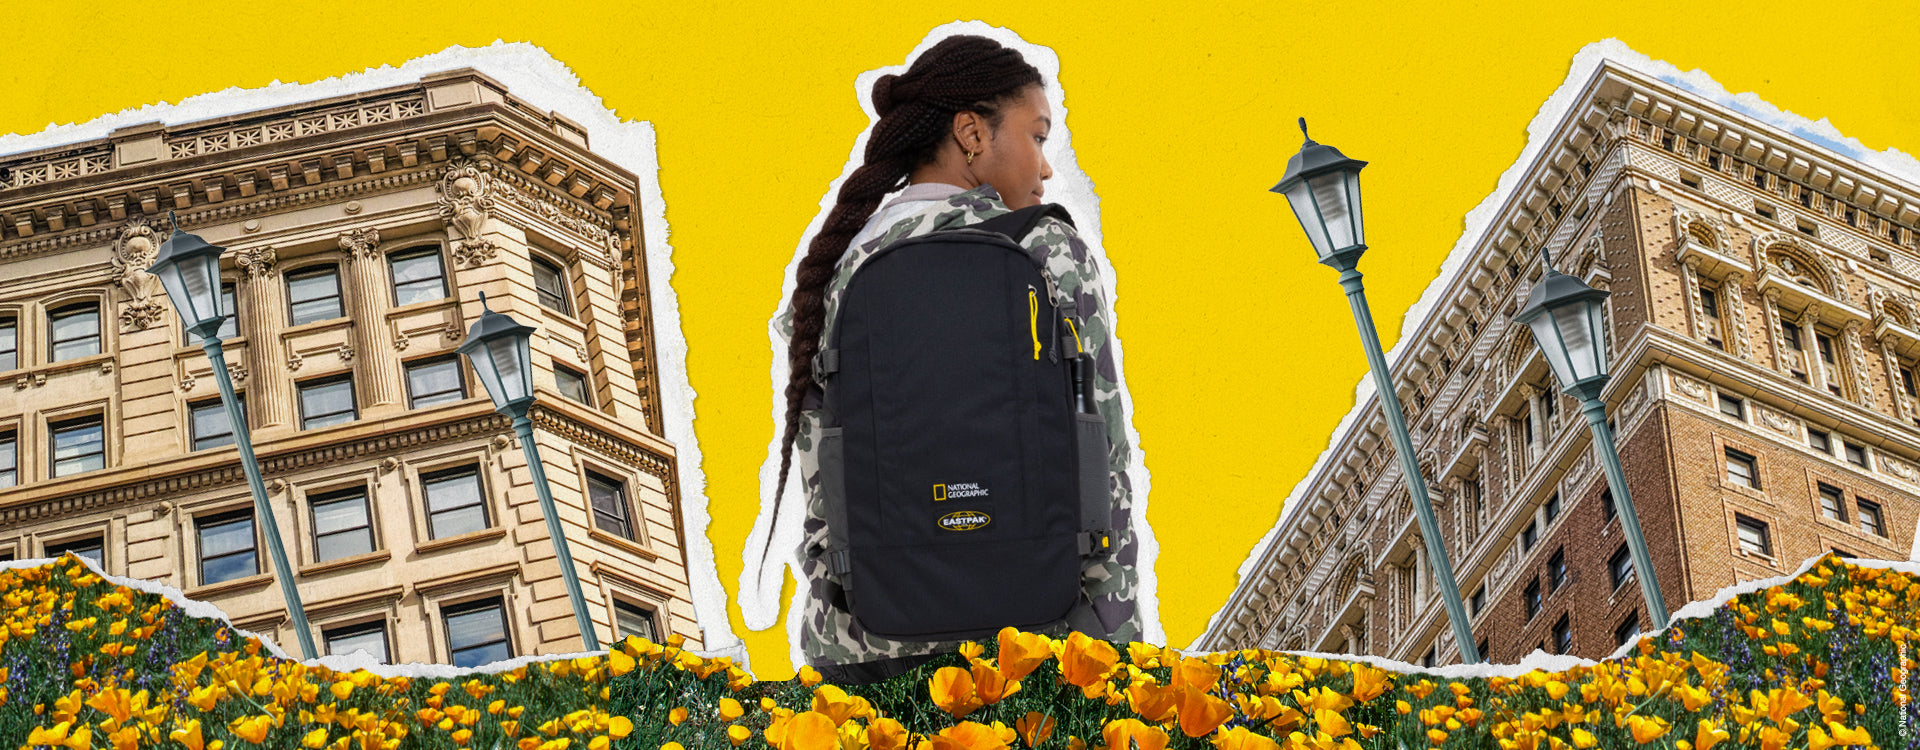 National Geographic and Eastpak Collaboration